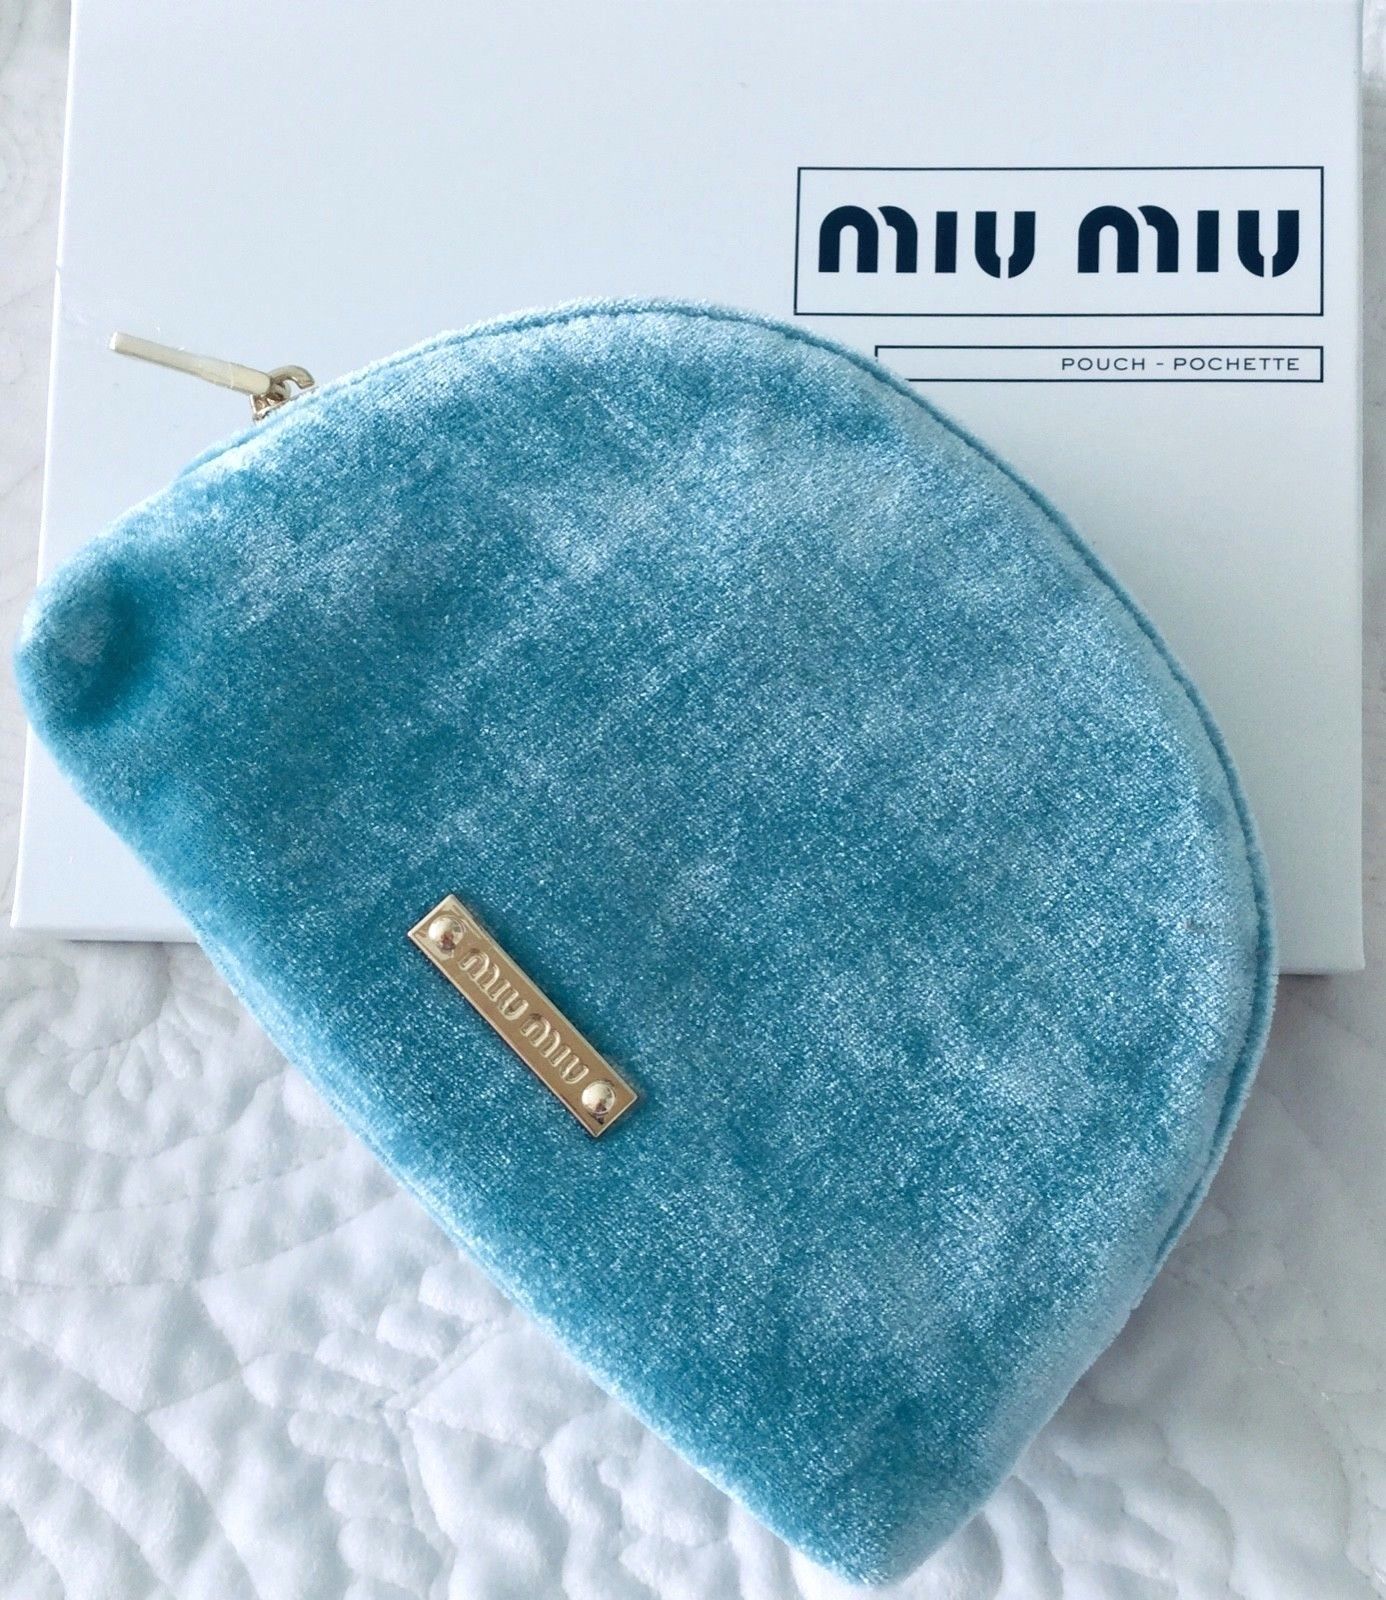 Primary image for NEW Genuine MIU MIU Teal Blue Modern Velvet Pouch Clutch Cosmetic Bag Authentic